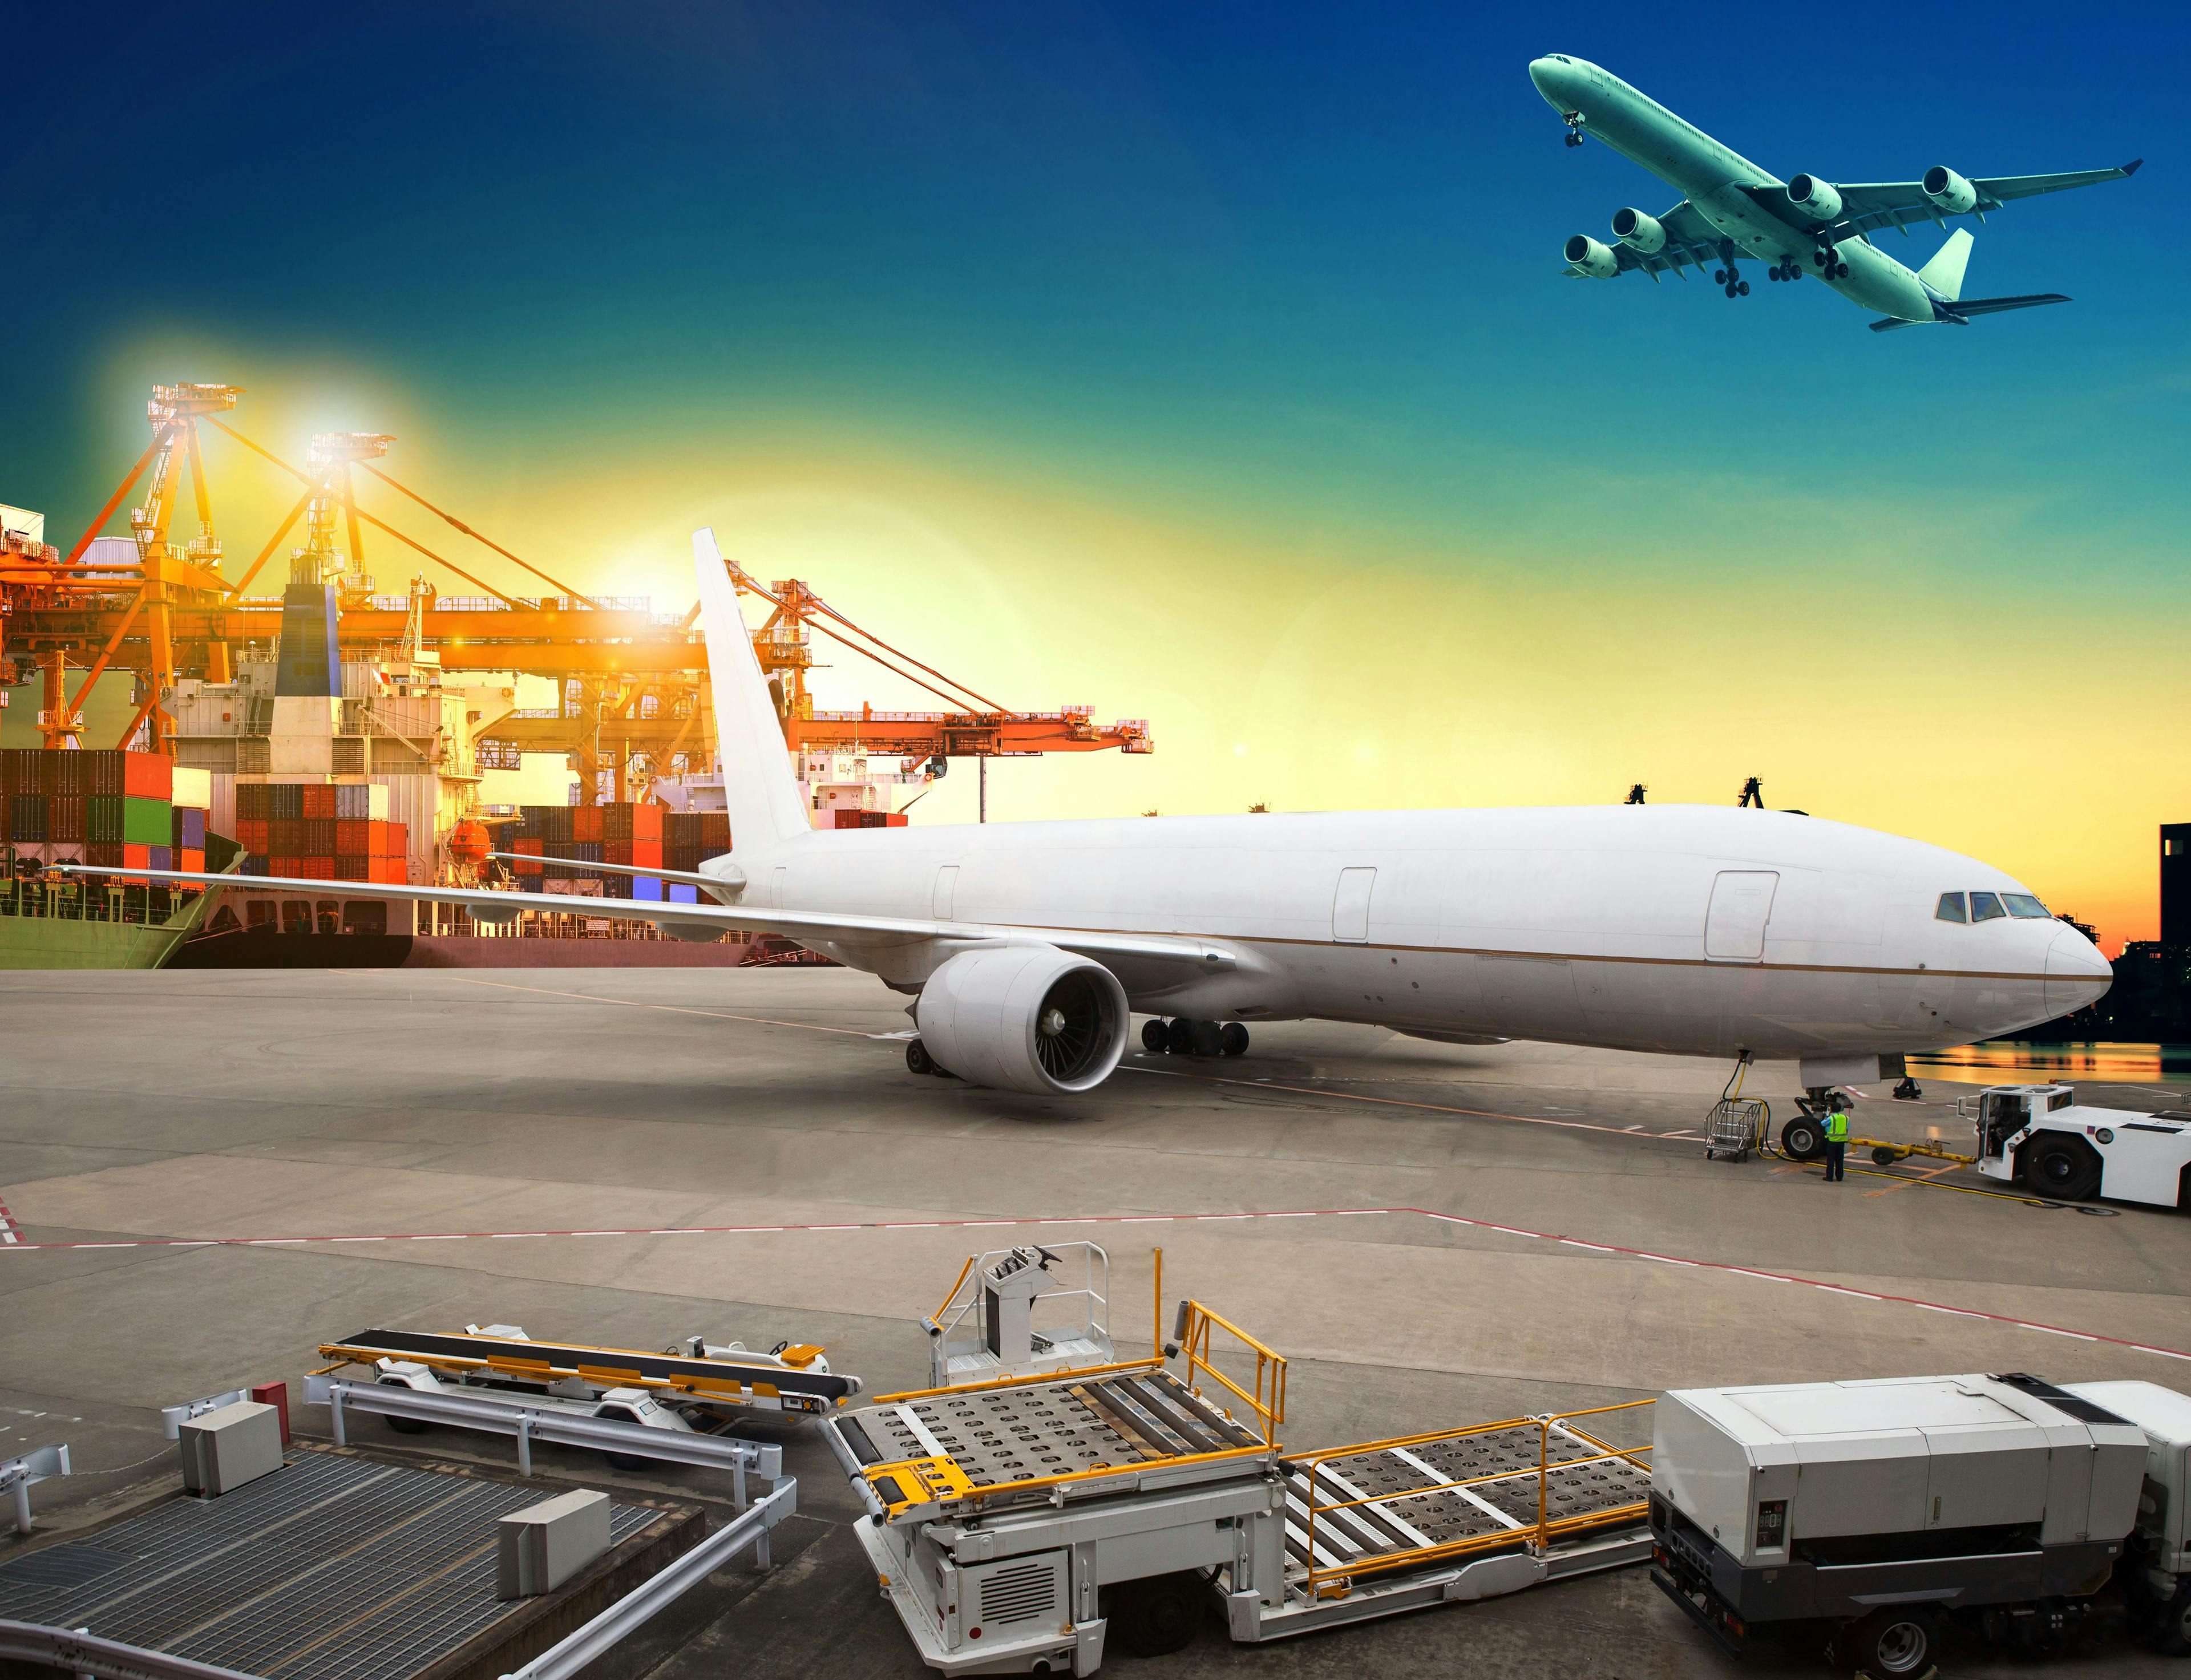 air freight and cargo plane loading trading goods in airport con. Image Credit: Adobe Stock Images/stockphoto mania